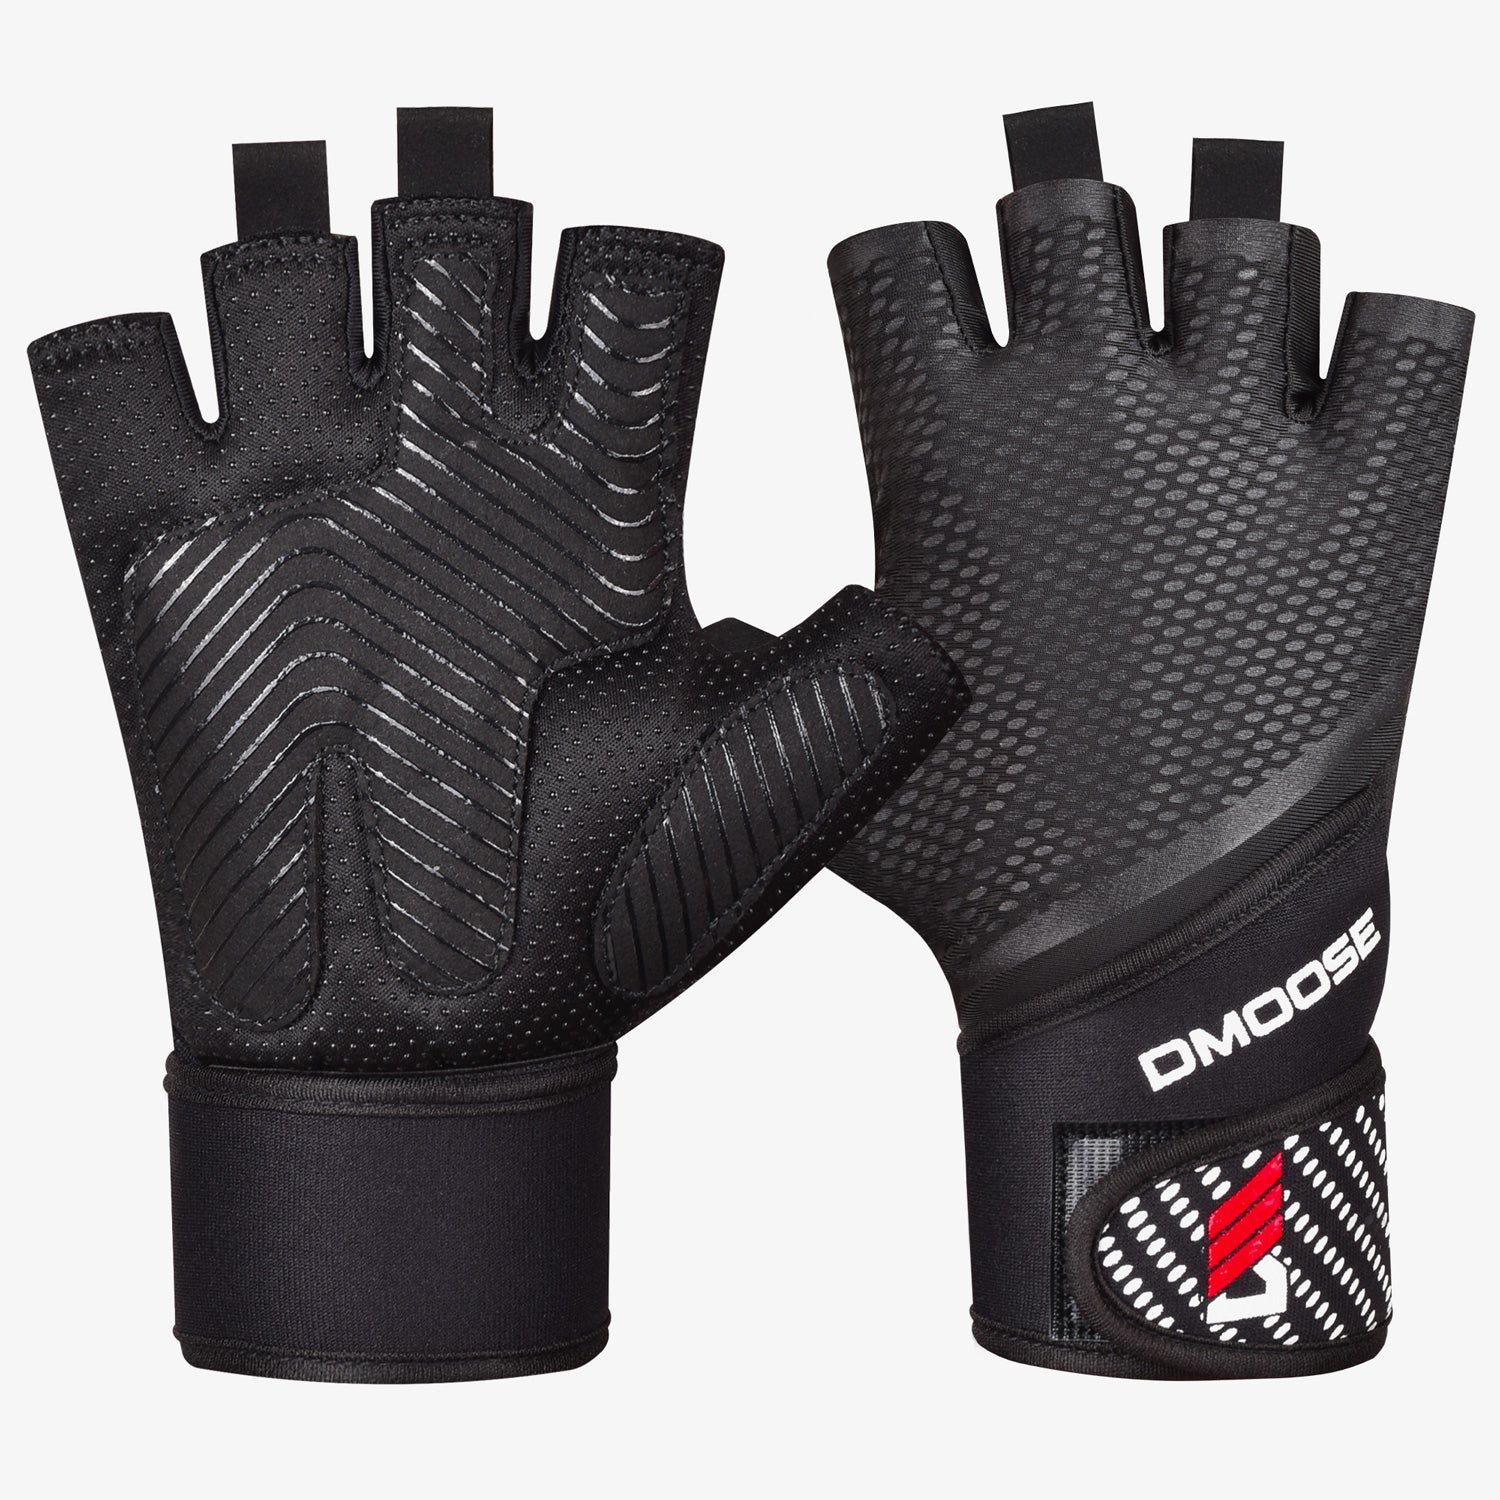 DMoose Weight Lifting Gloves Black - Without Wrist Support XL